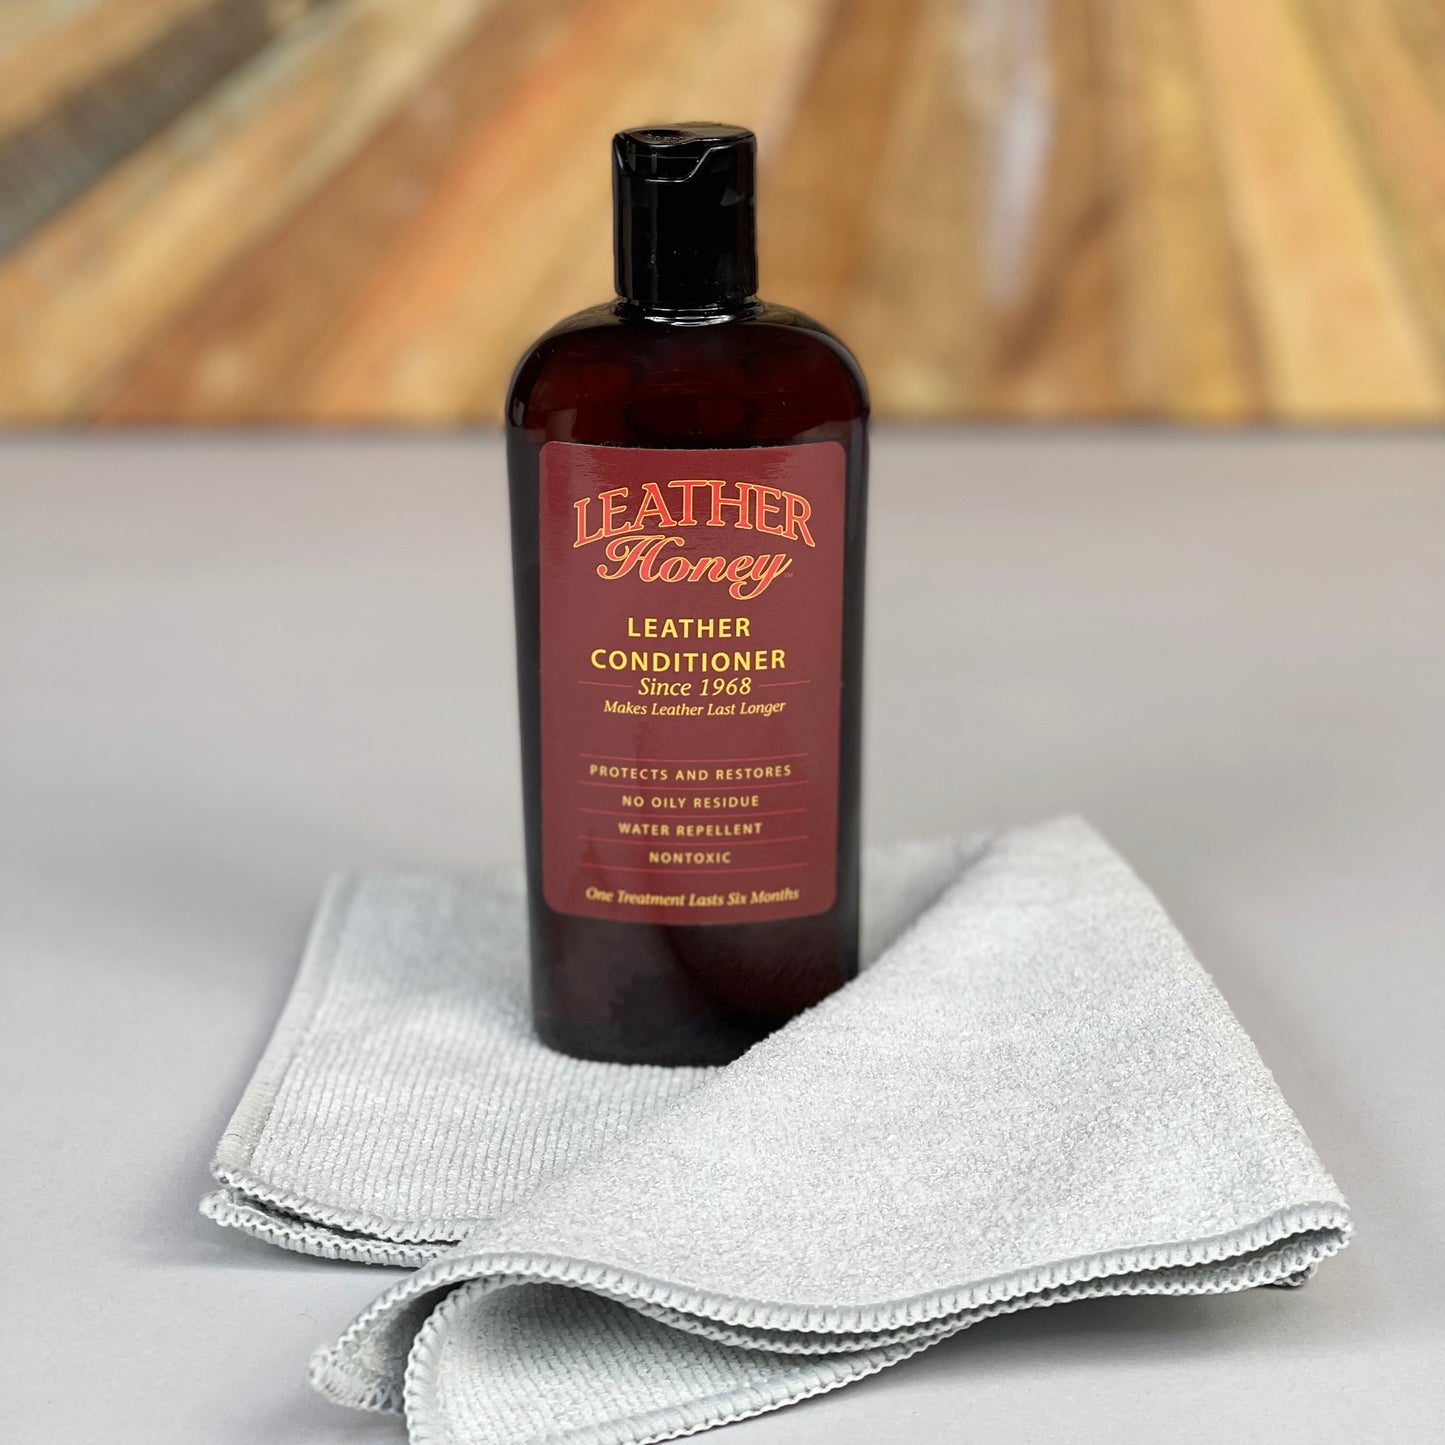 "Leather Honey" Leather Conditioner